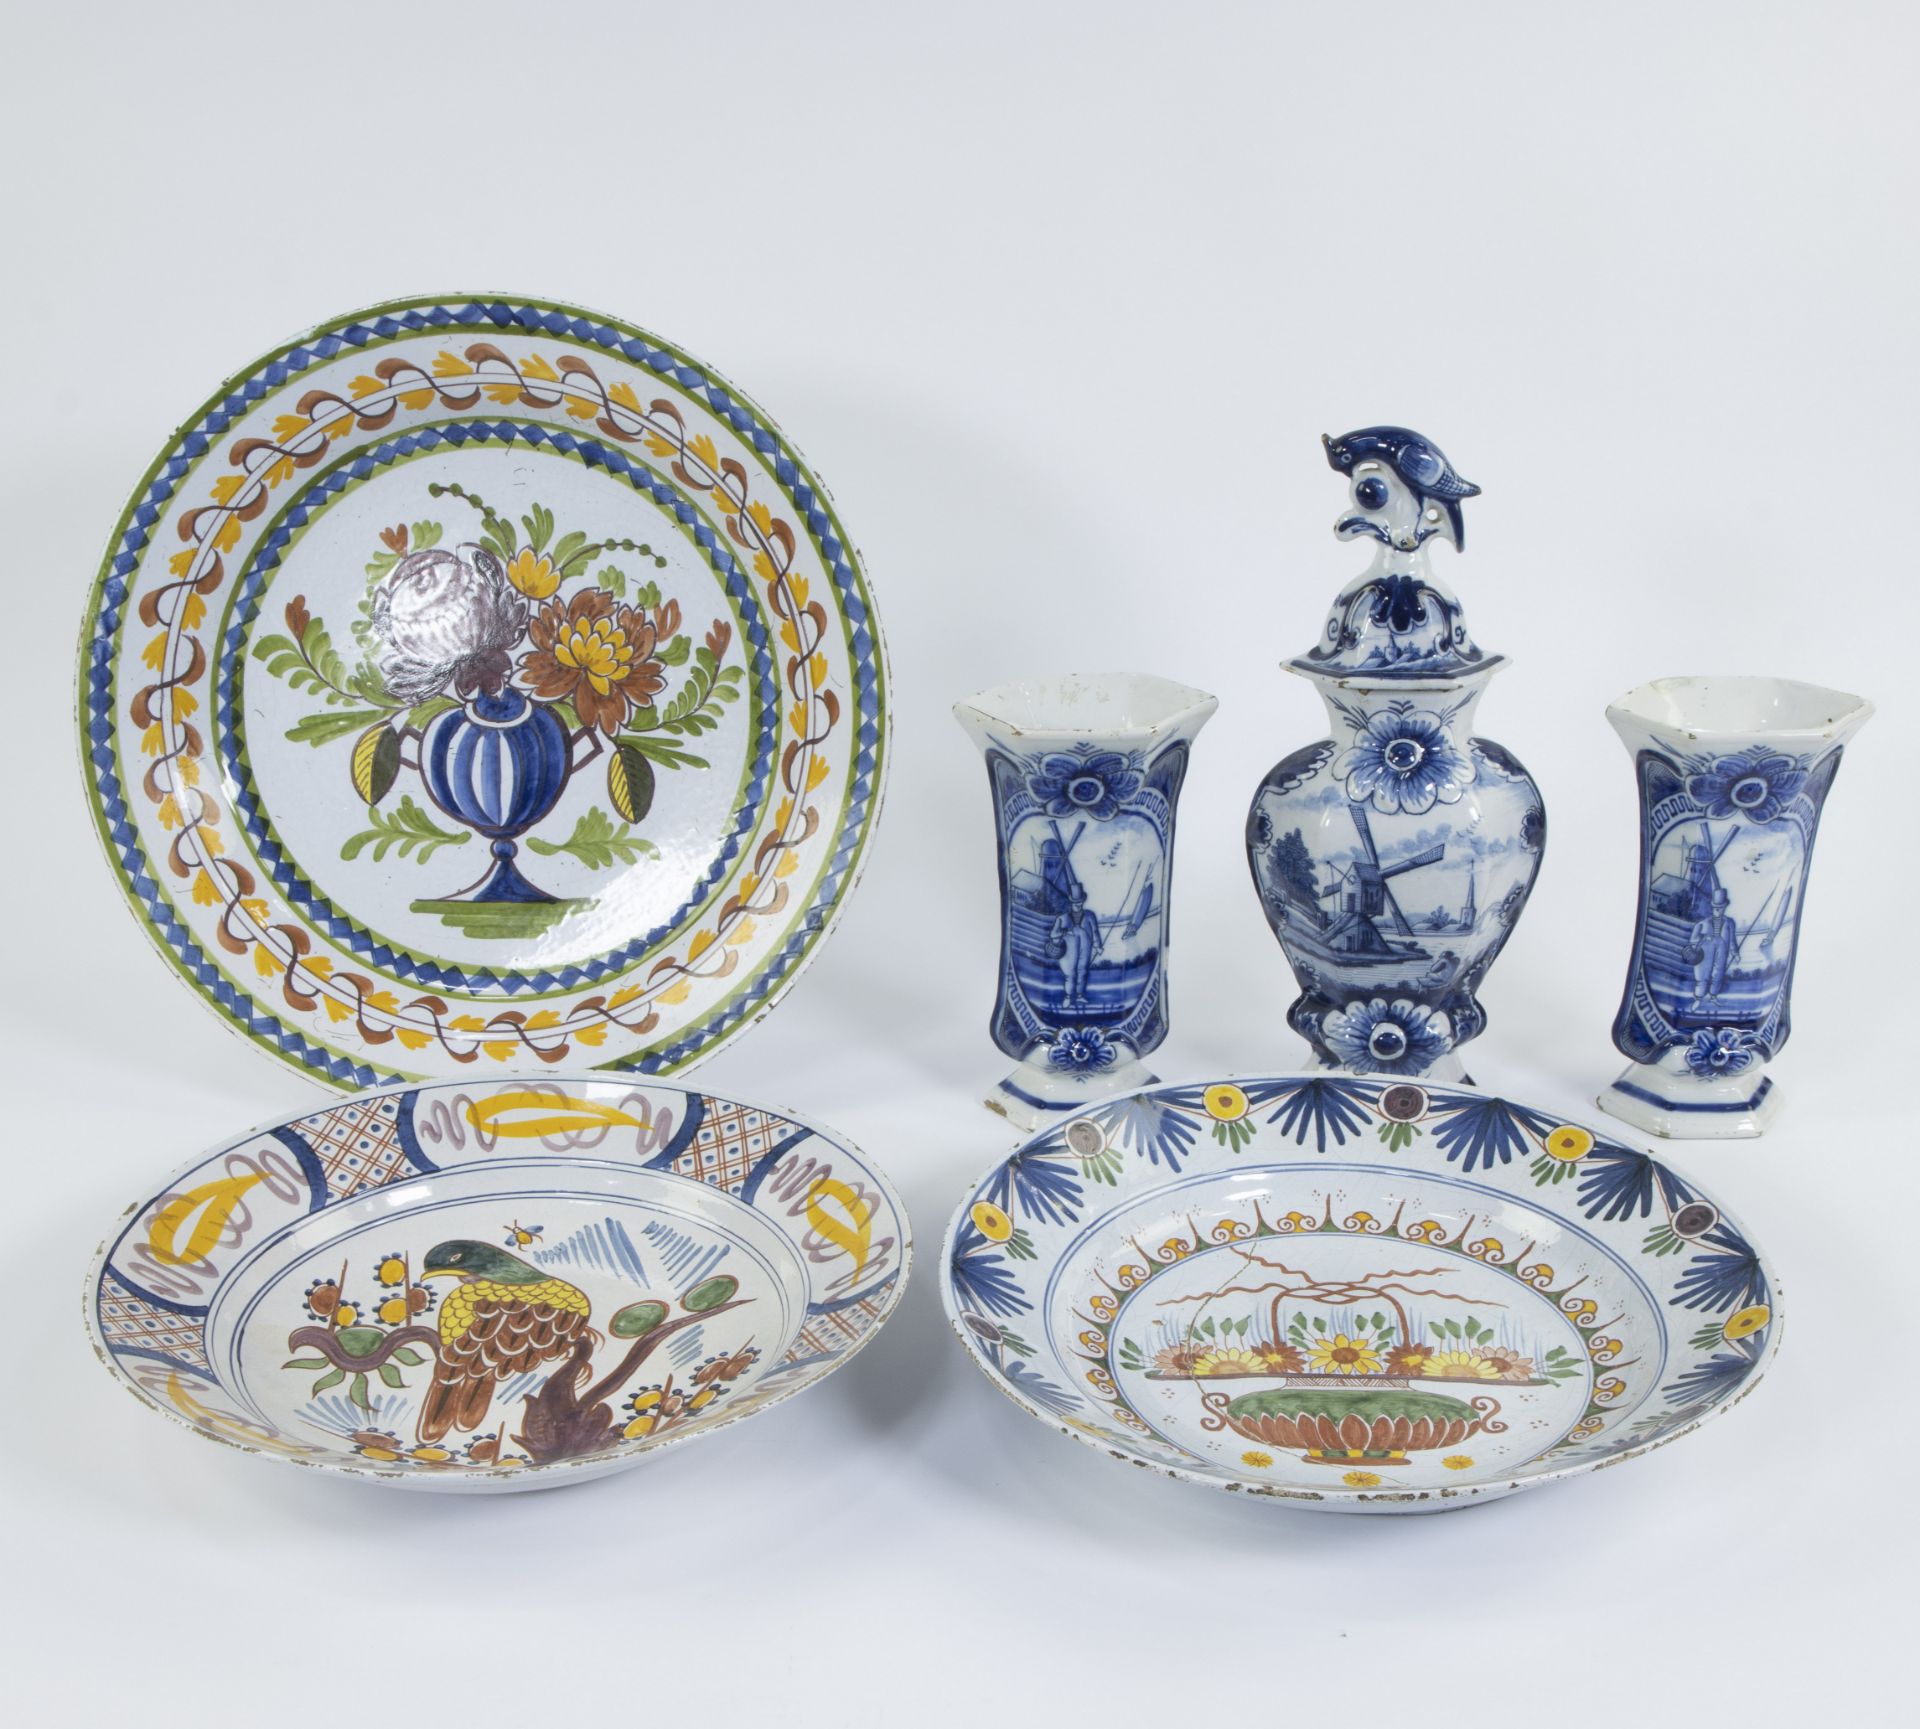 Collection Delftware, 3 polychrome plates 18th century and 3 vases blue white from a garniture set